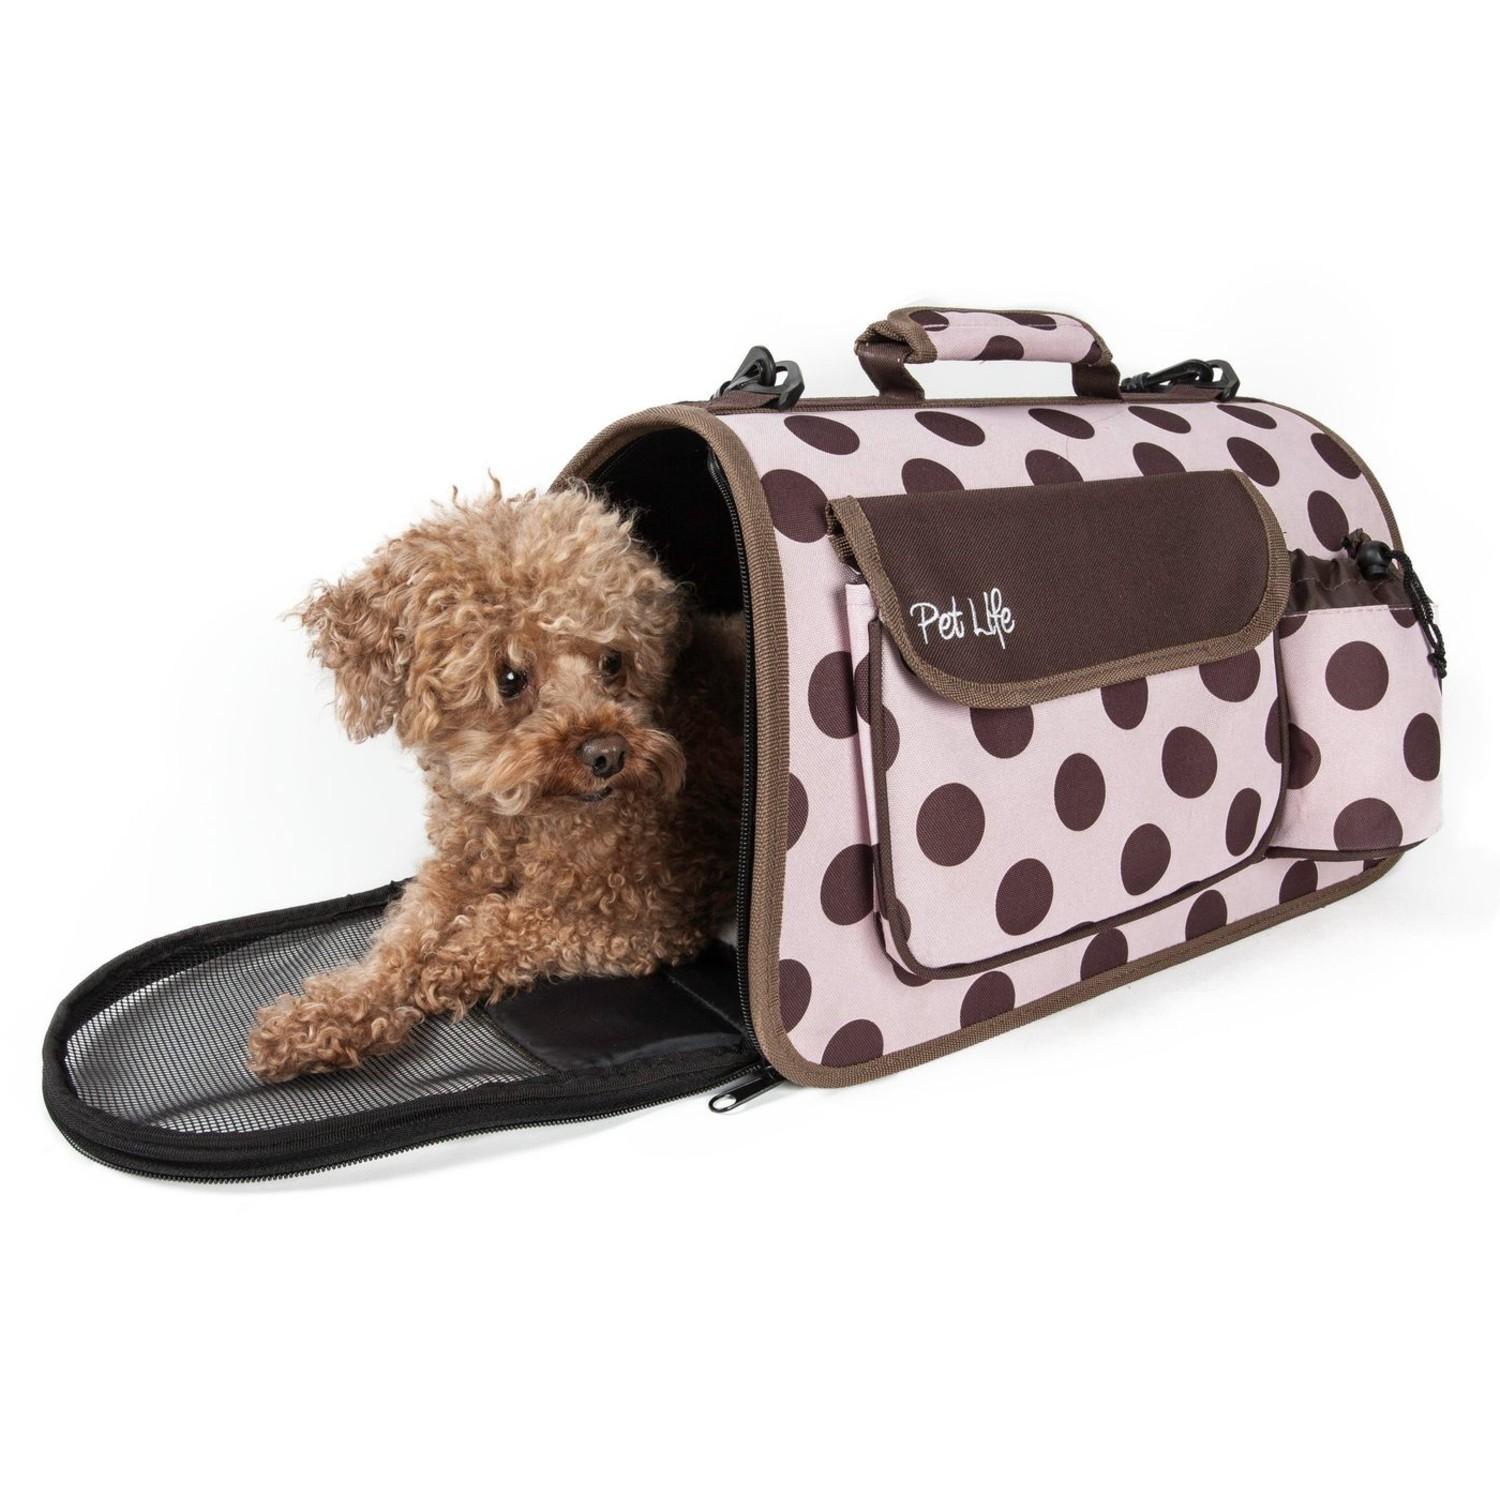 https://images.baxterboo.com/global/images/products/large/pet-life-casual-polka-dotted-collapsible-dog-carrier-pouch-1504.jpg